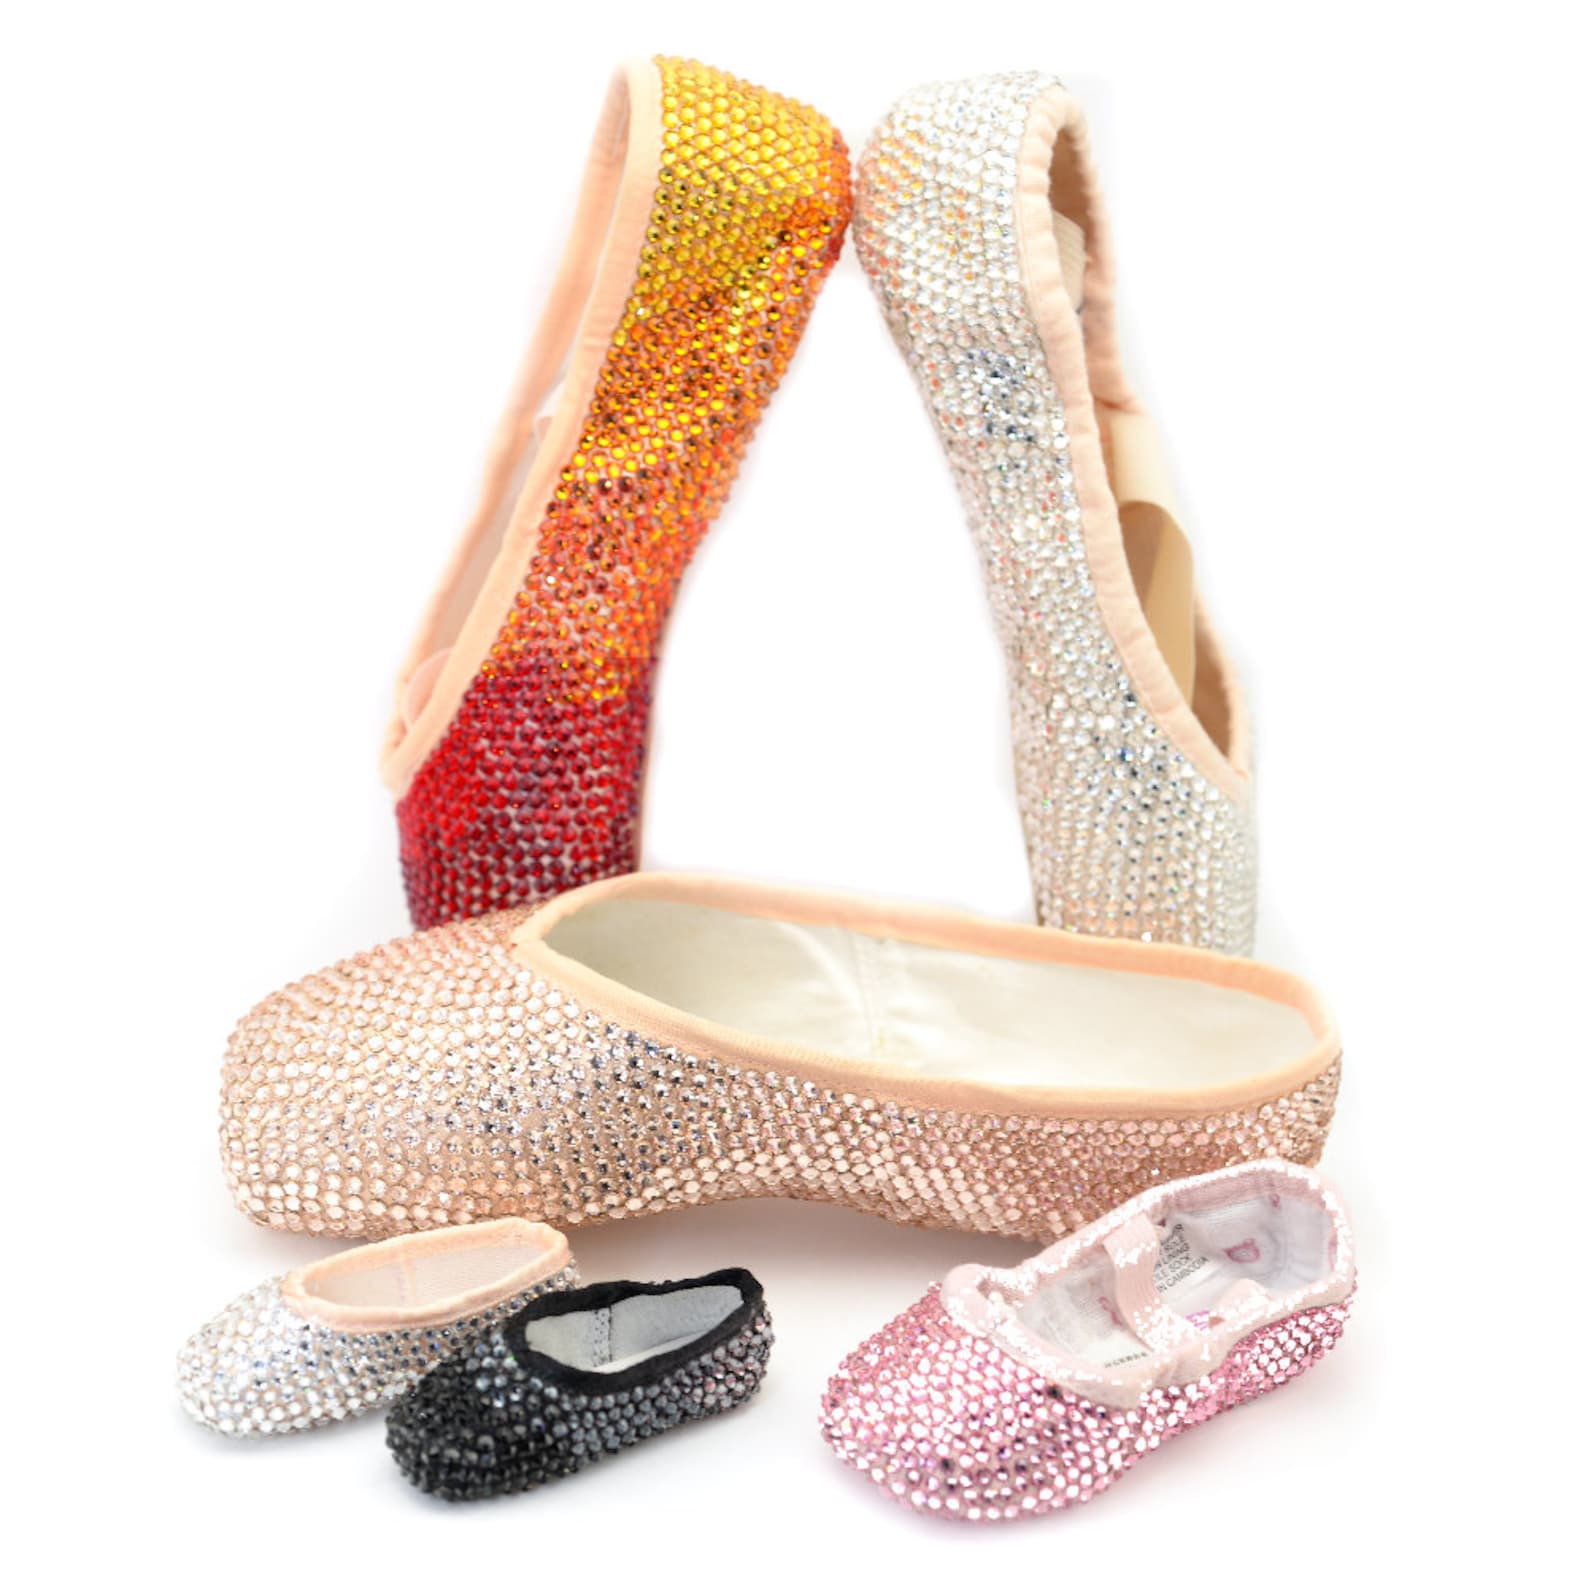 decorated pointe shoes | crystal ballet shoes | gift for dancer | 100% swarovski crystals | your pointe shoes decorated with cry